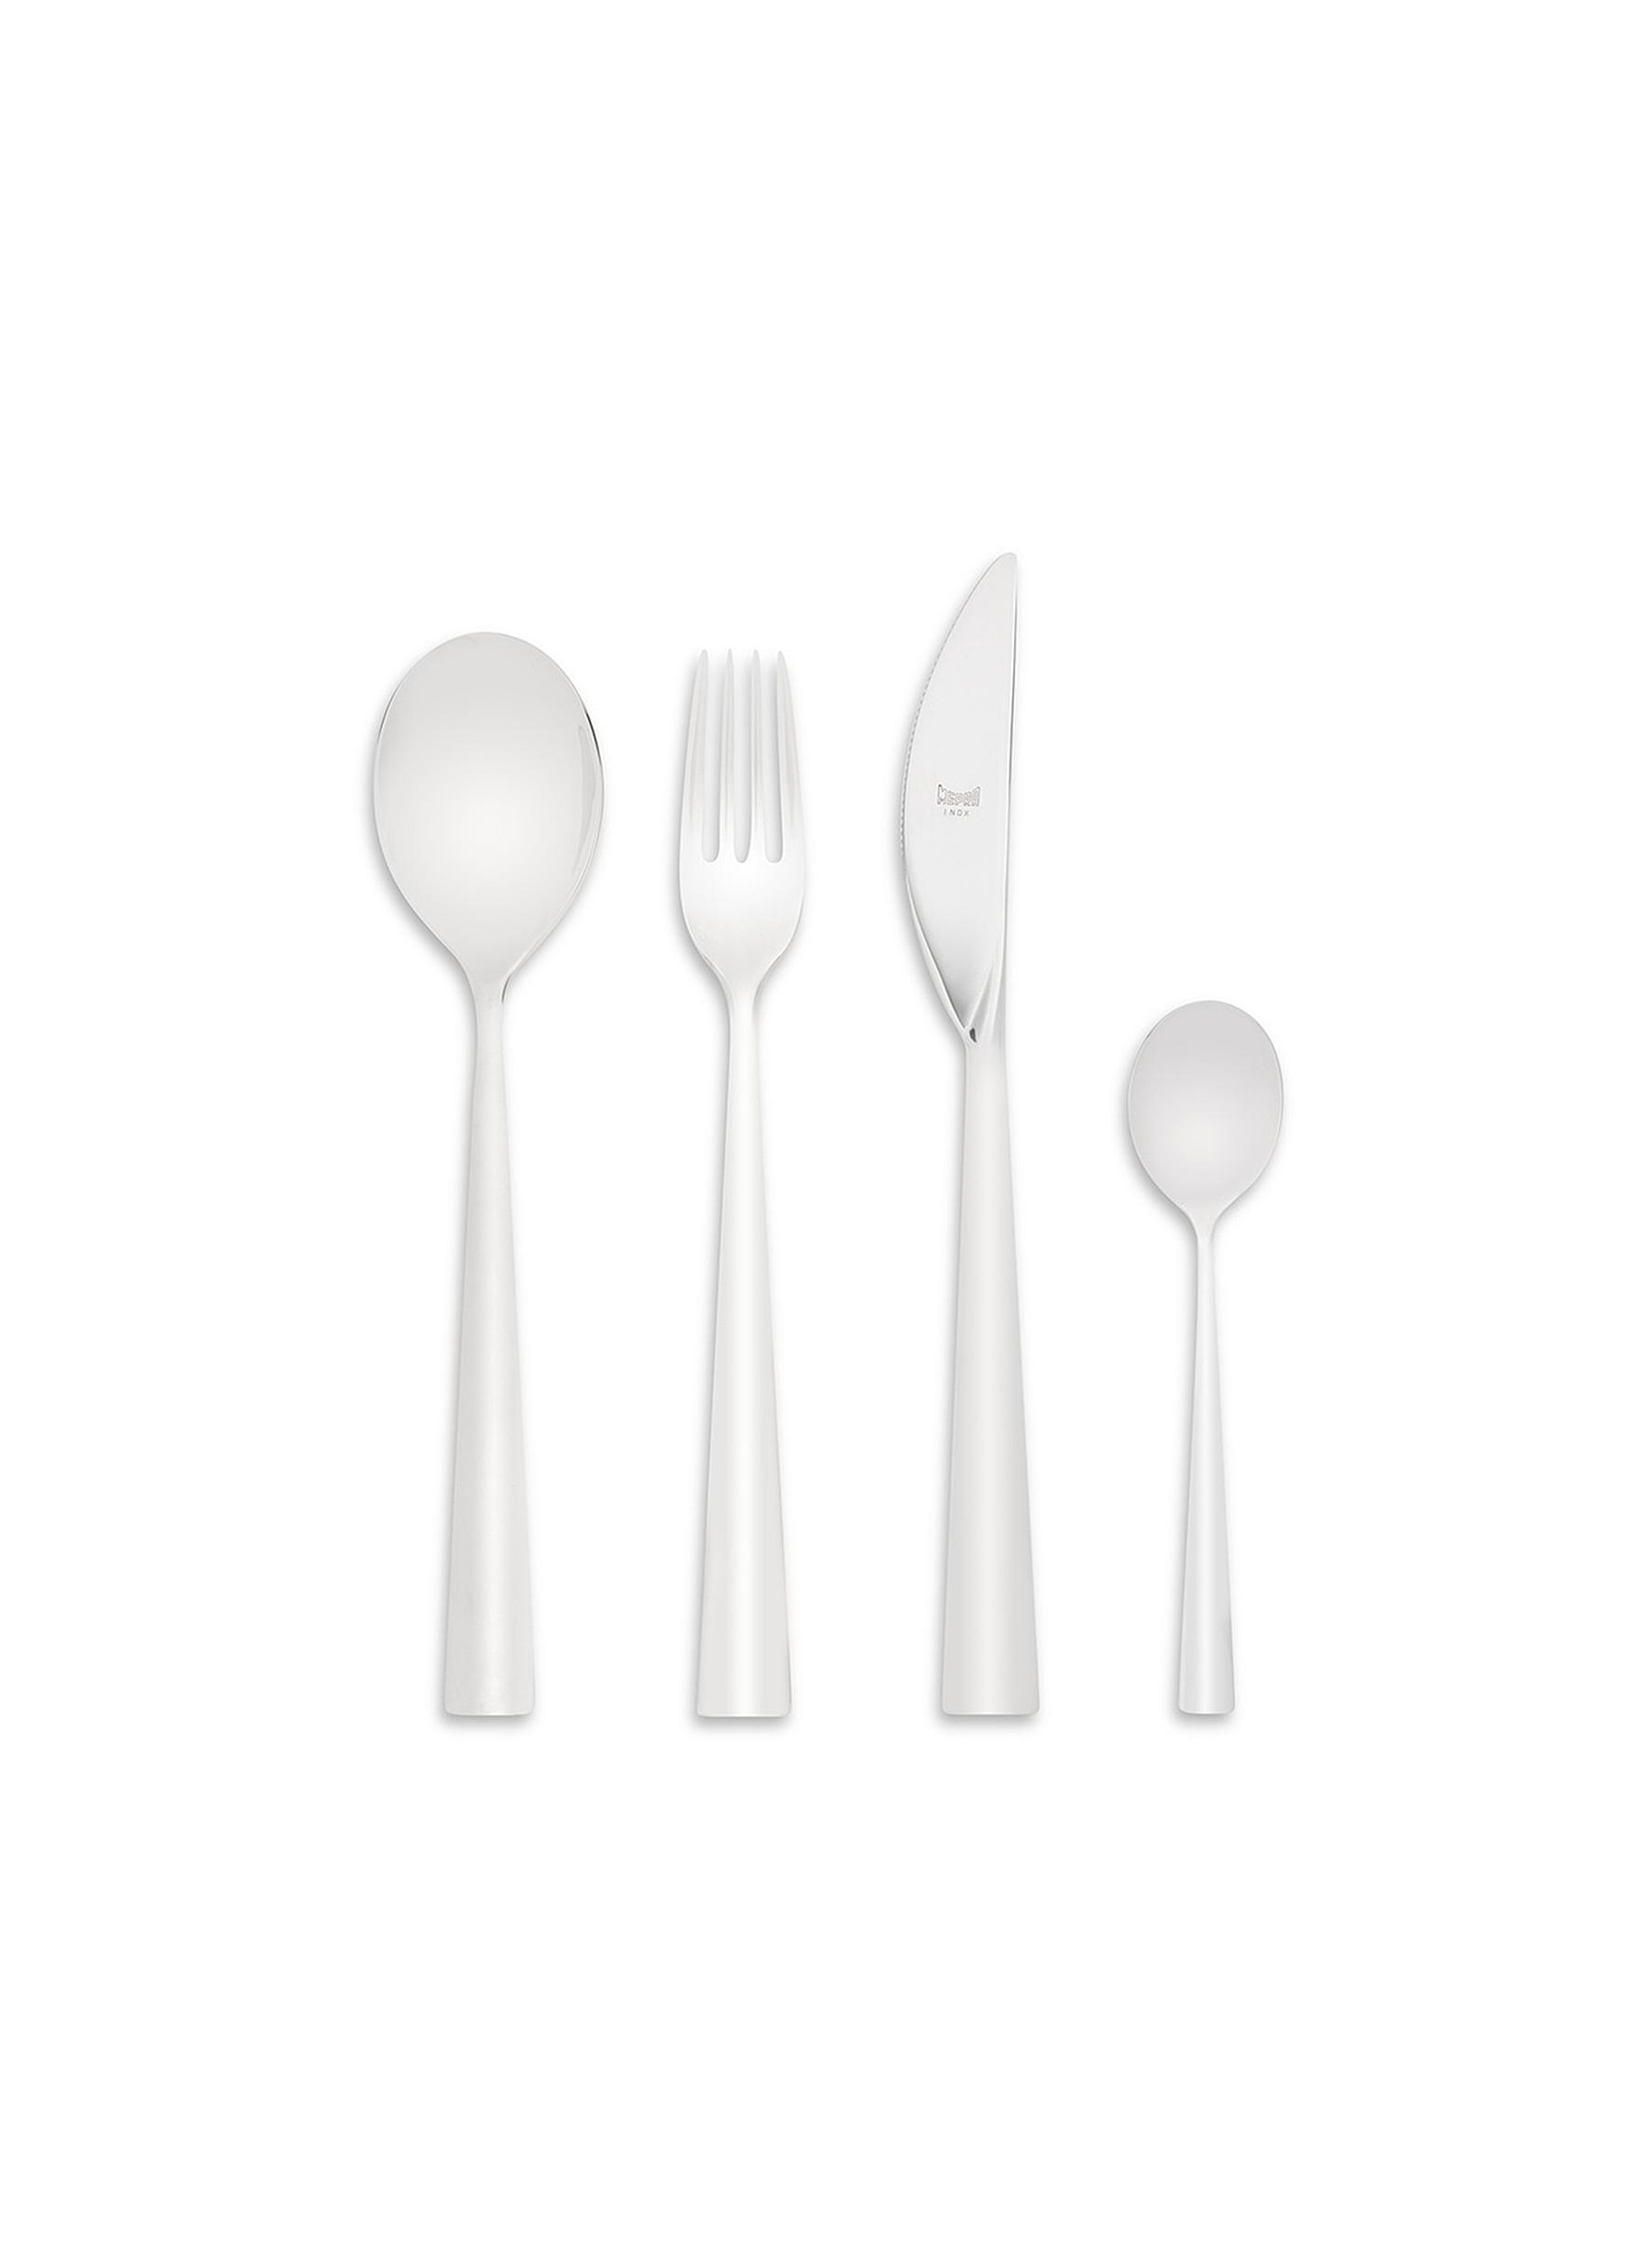 Energia 24-piece cutlery gift set